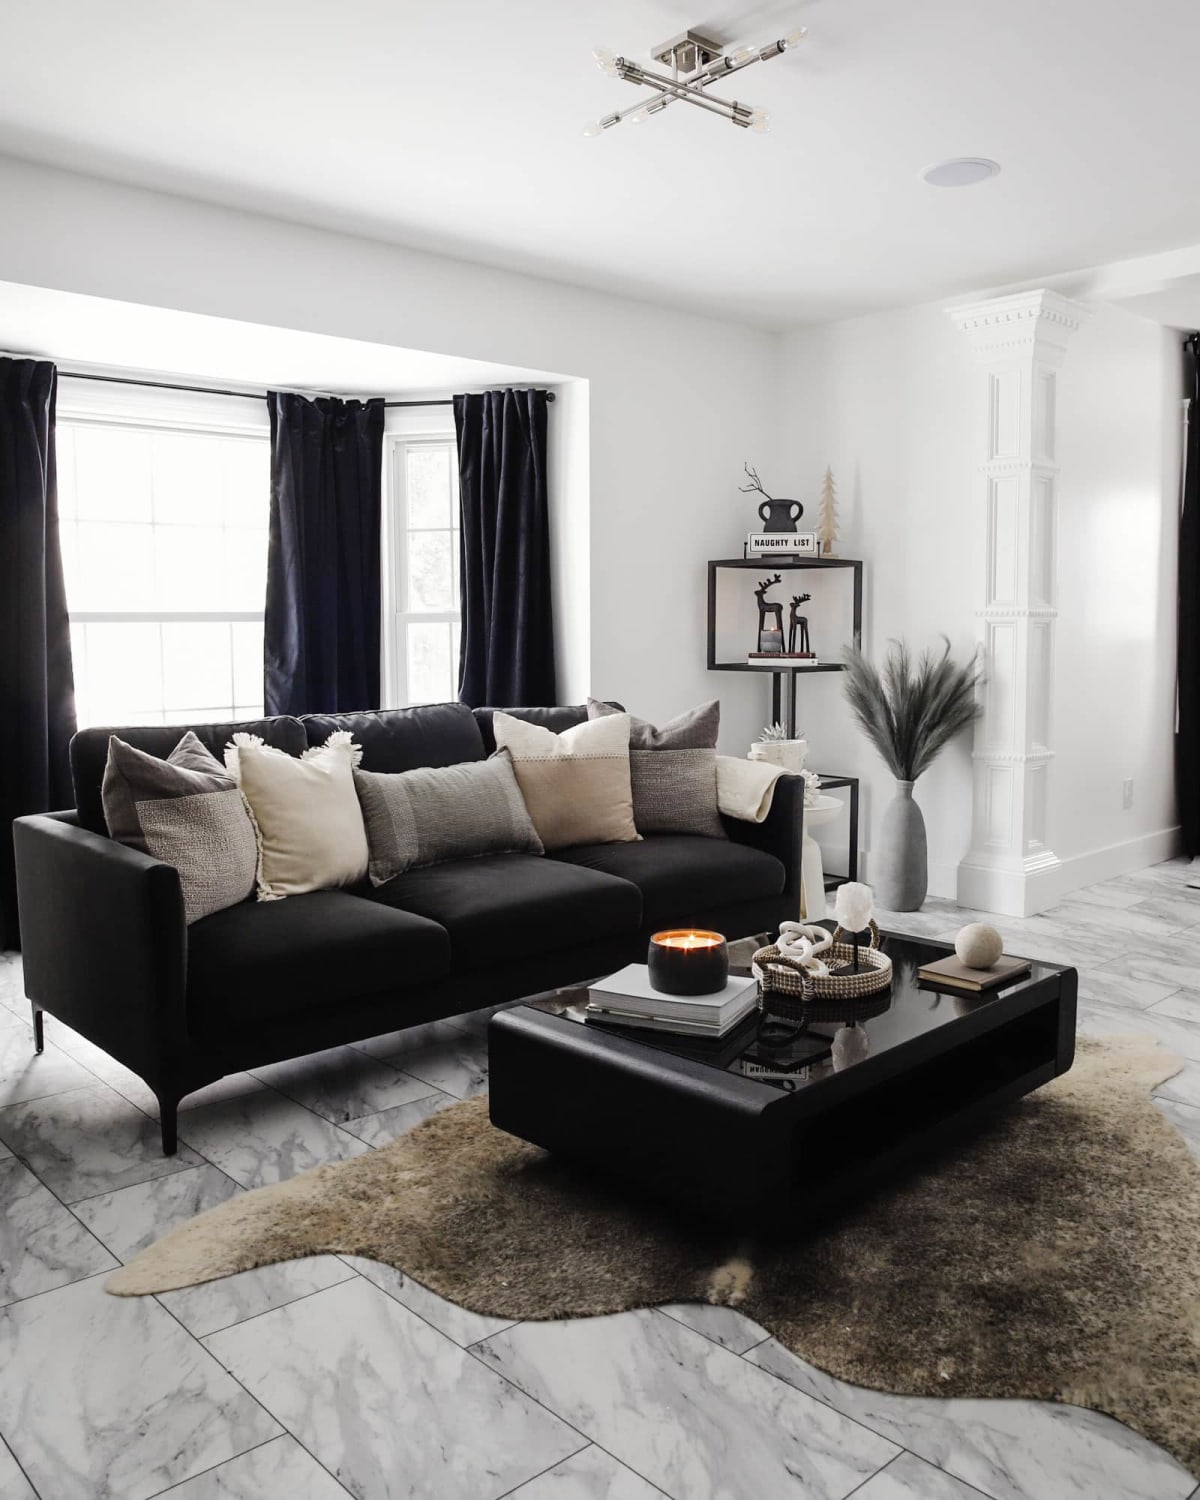 How to Style a Black Sofa | Castlery United States